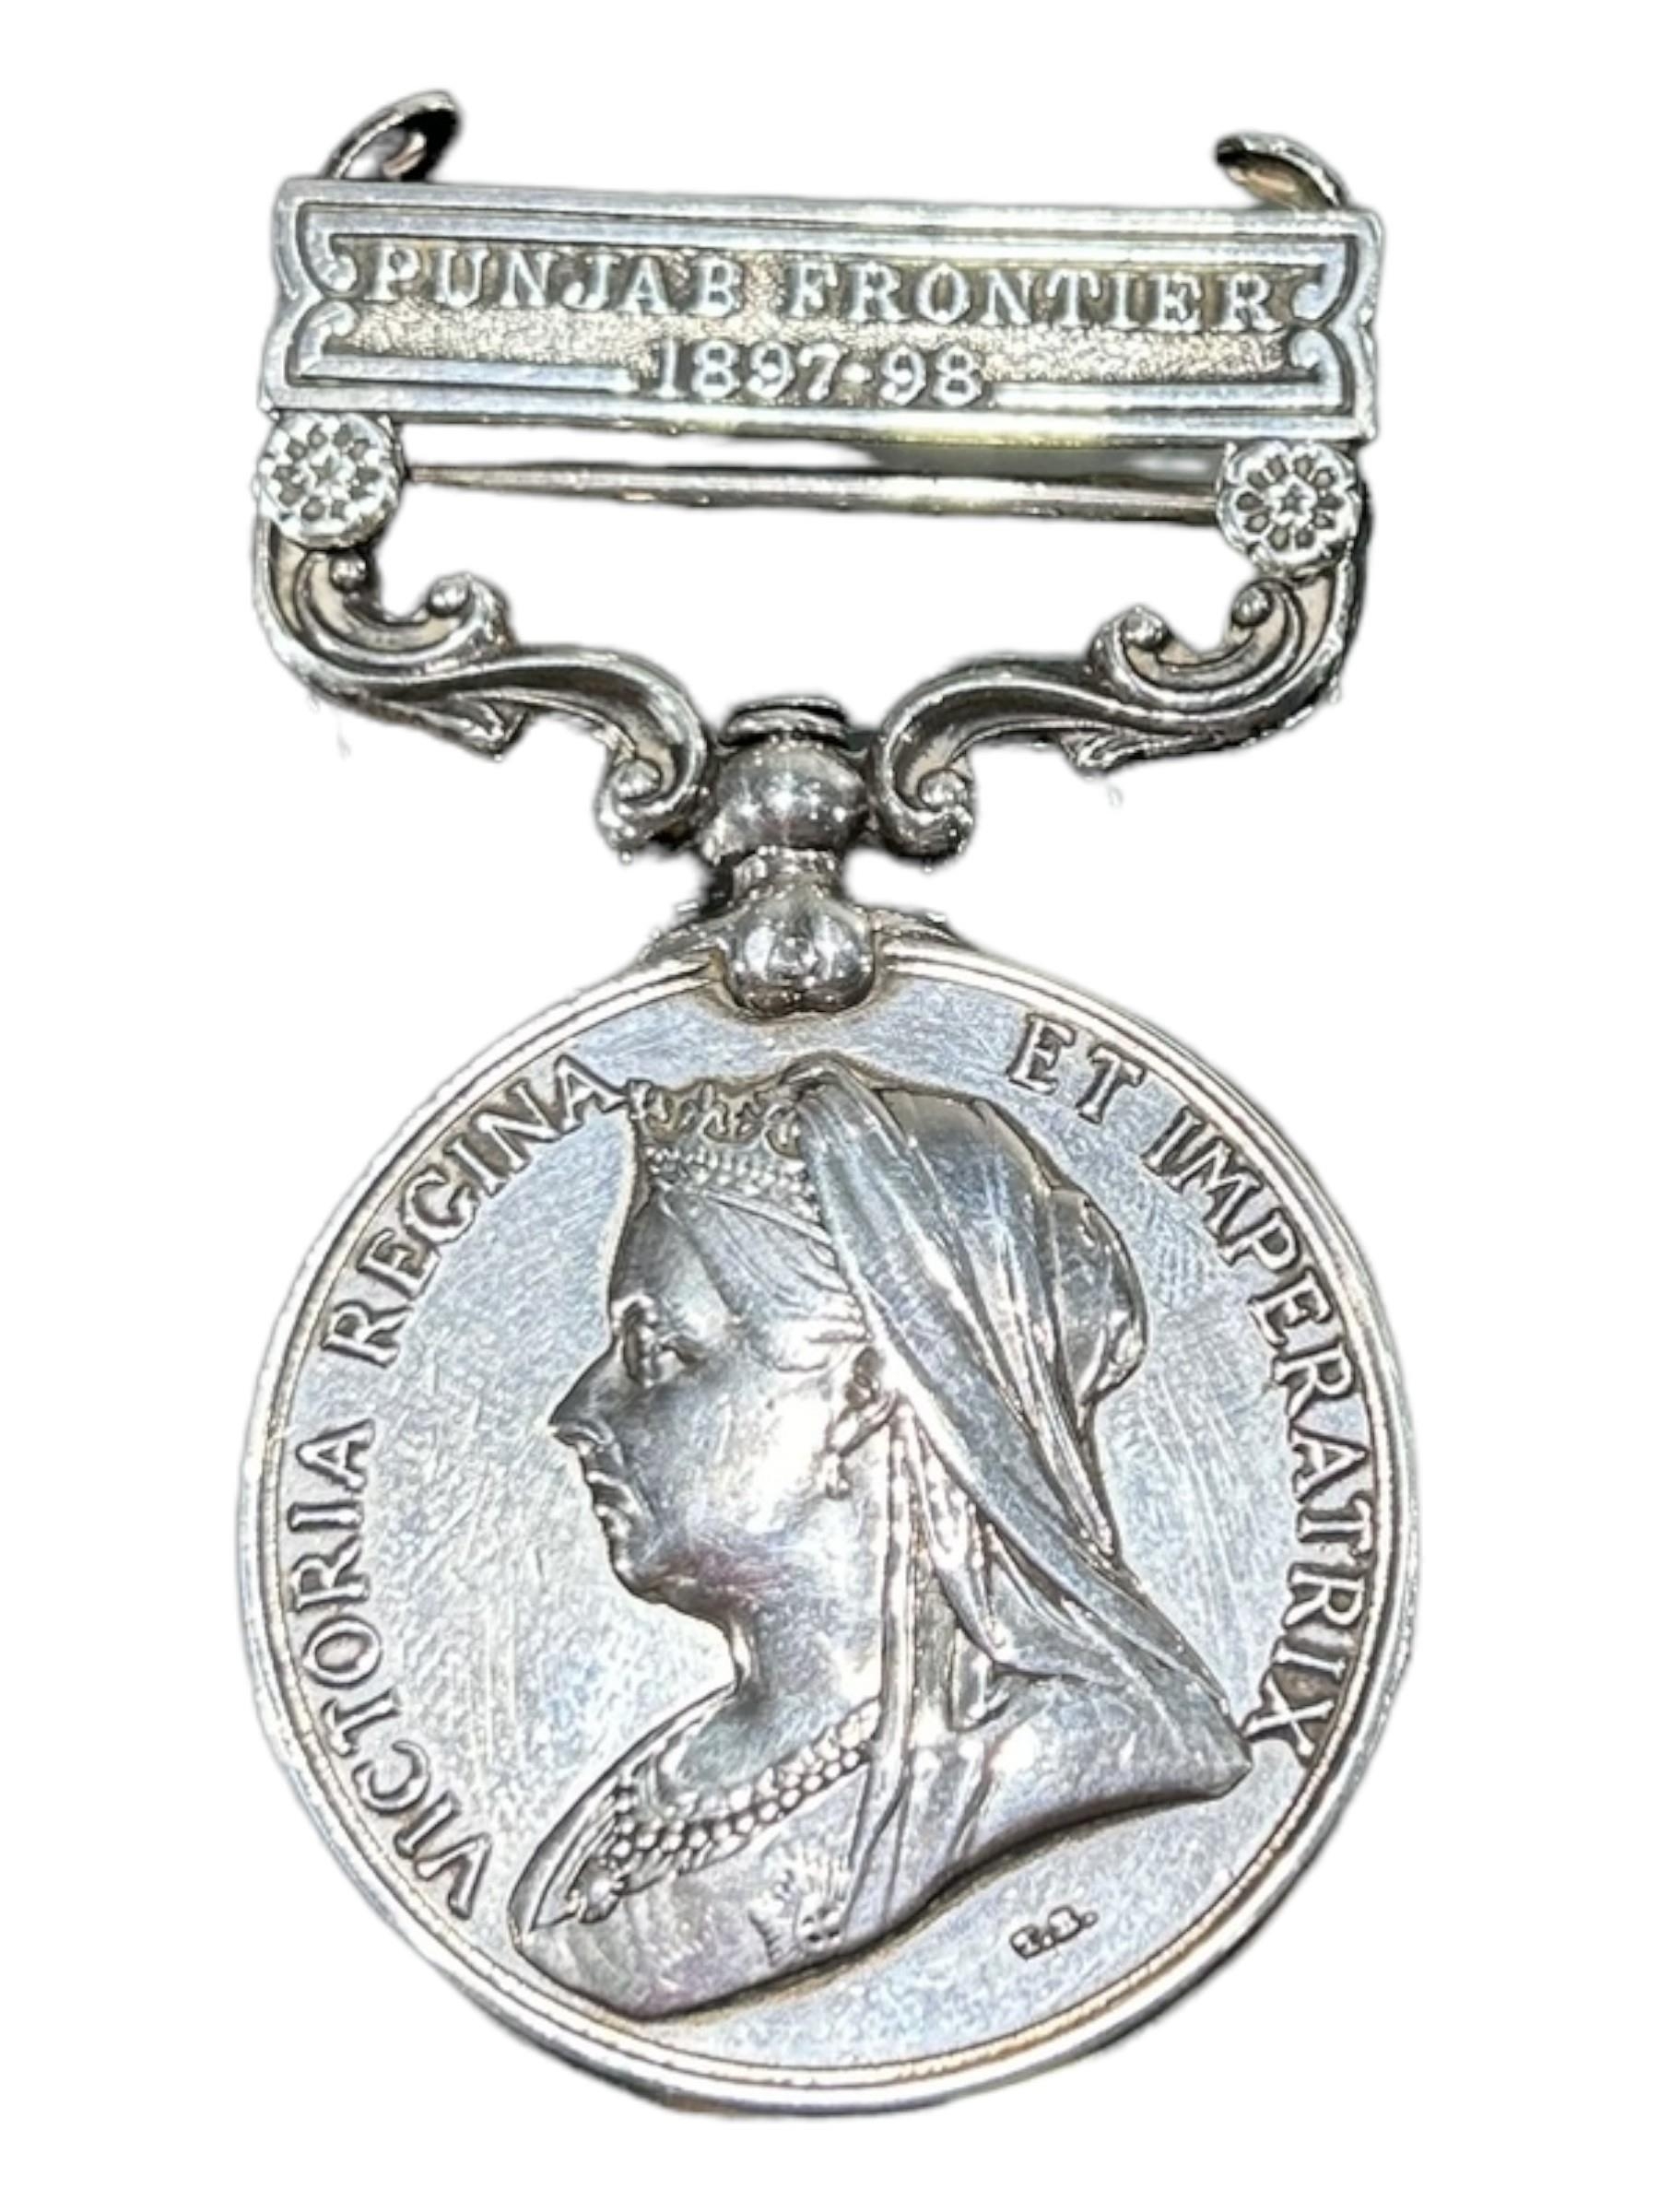 19TH CENTURY INDIA MEDAL, 1897 - 1898, PUNJAB FRONTIER, TOGETHER WITH A COLLECTION OF OTHER MILITARY - Image 5 of 6